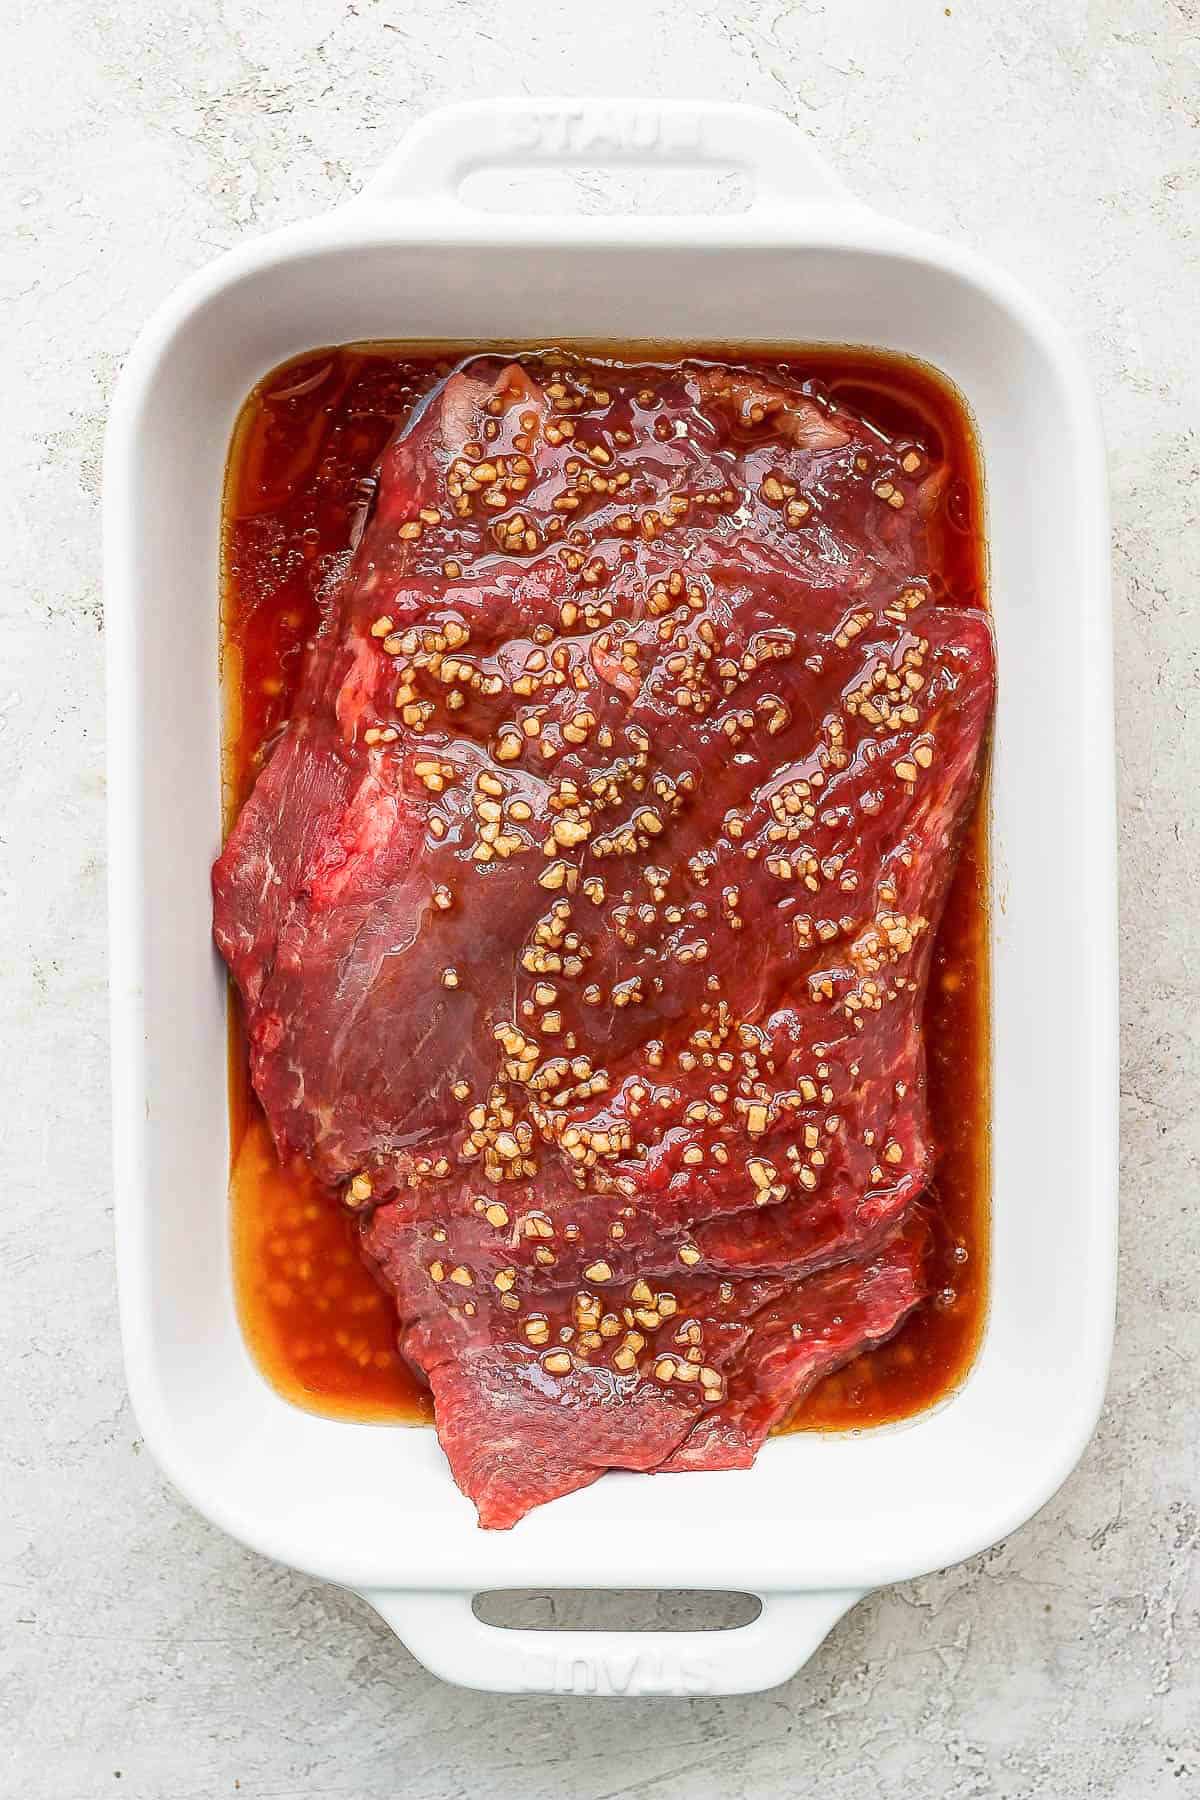 Flank steak covered in marinade in a white casserole dish.